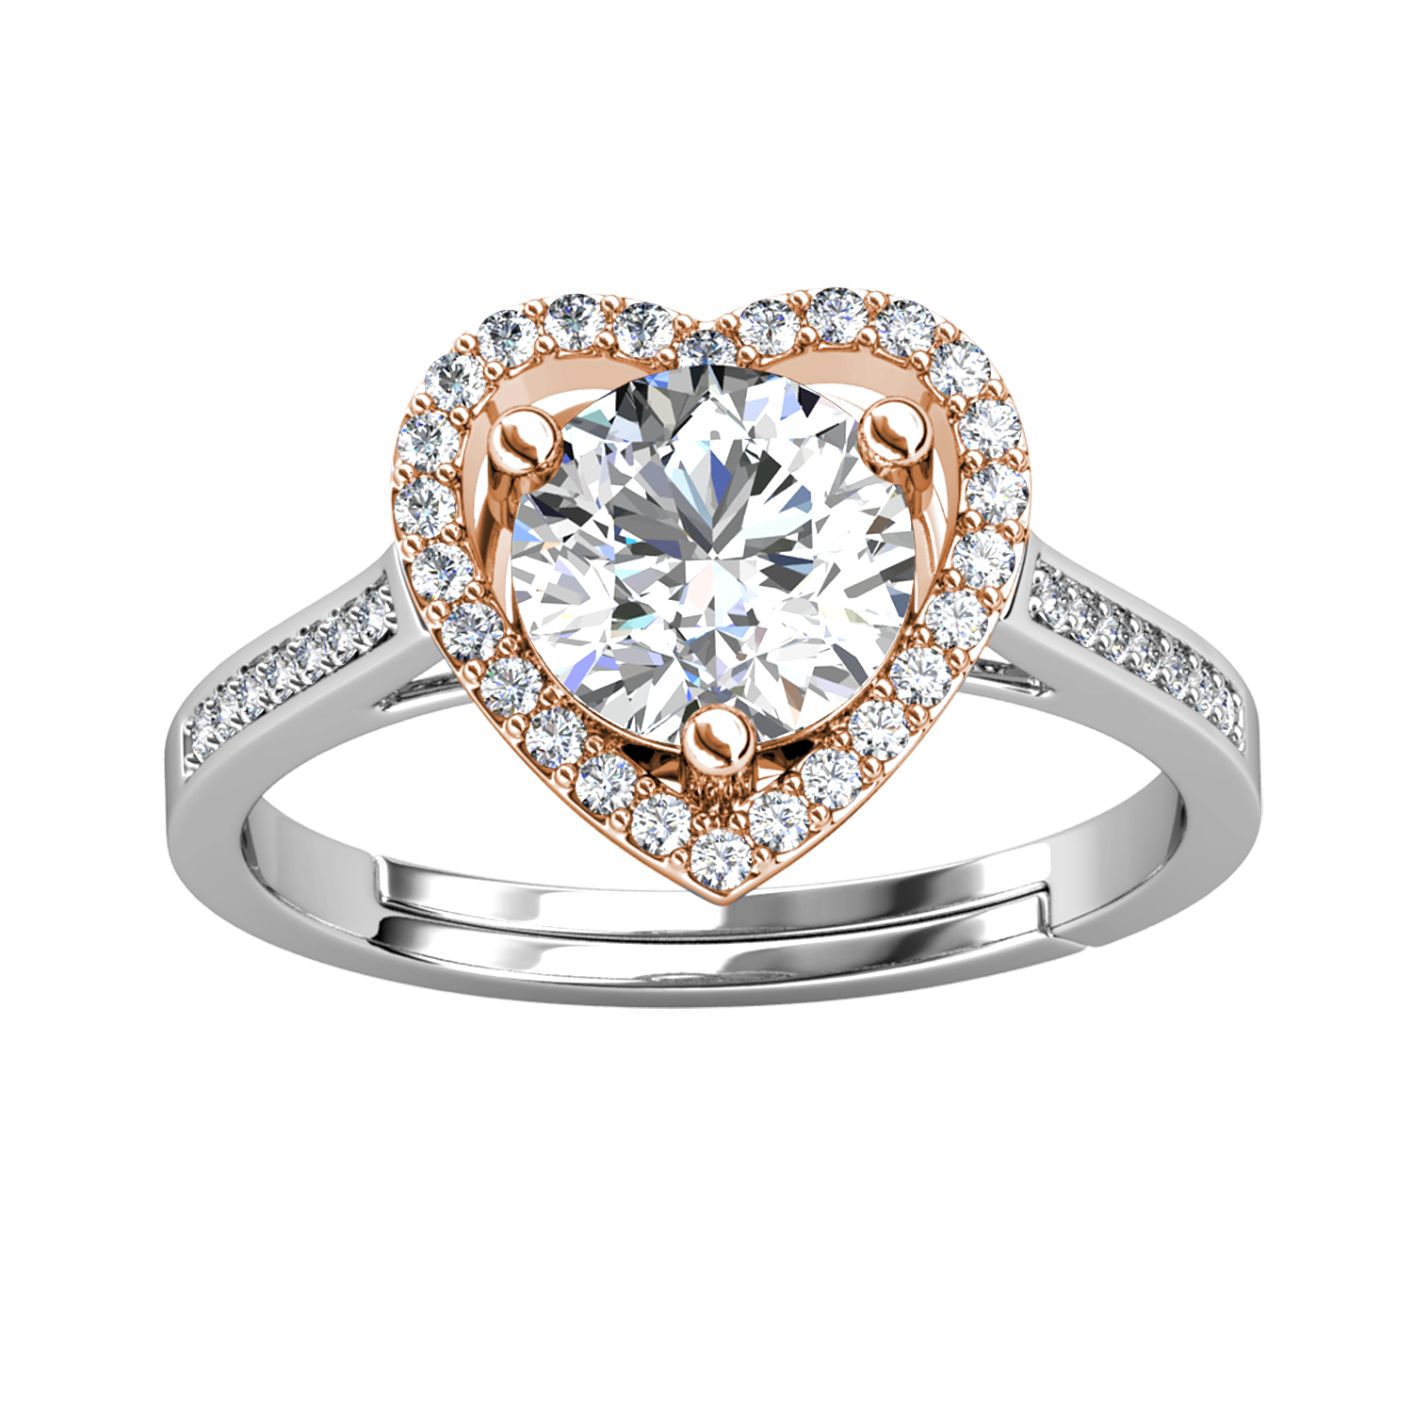 Her Jewellery MR020-CS Mon Amour Ring (Dual Tone)